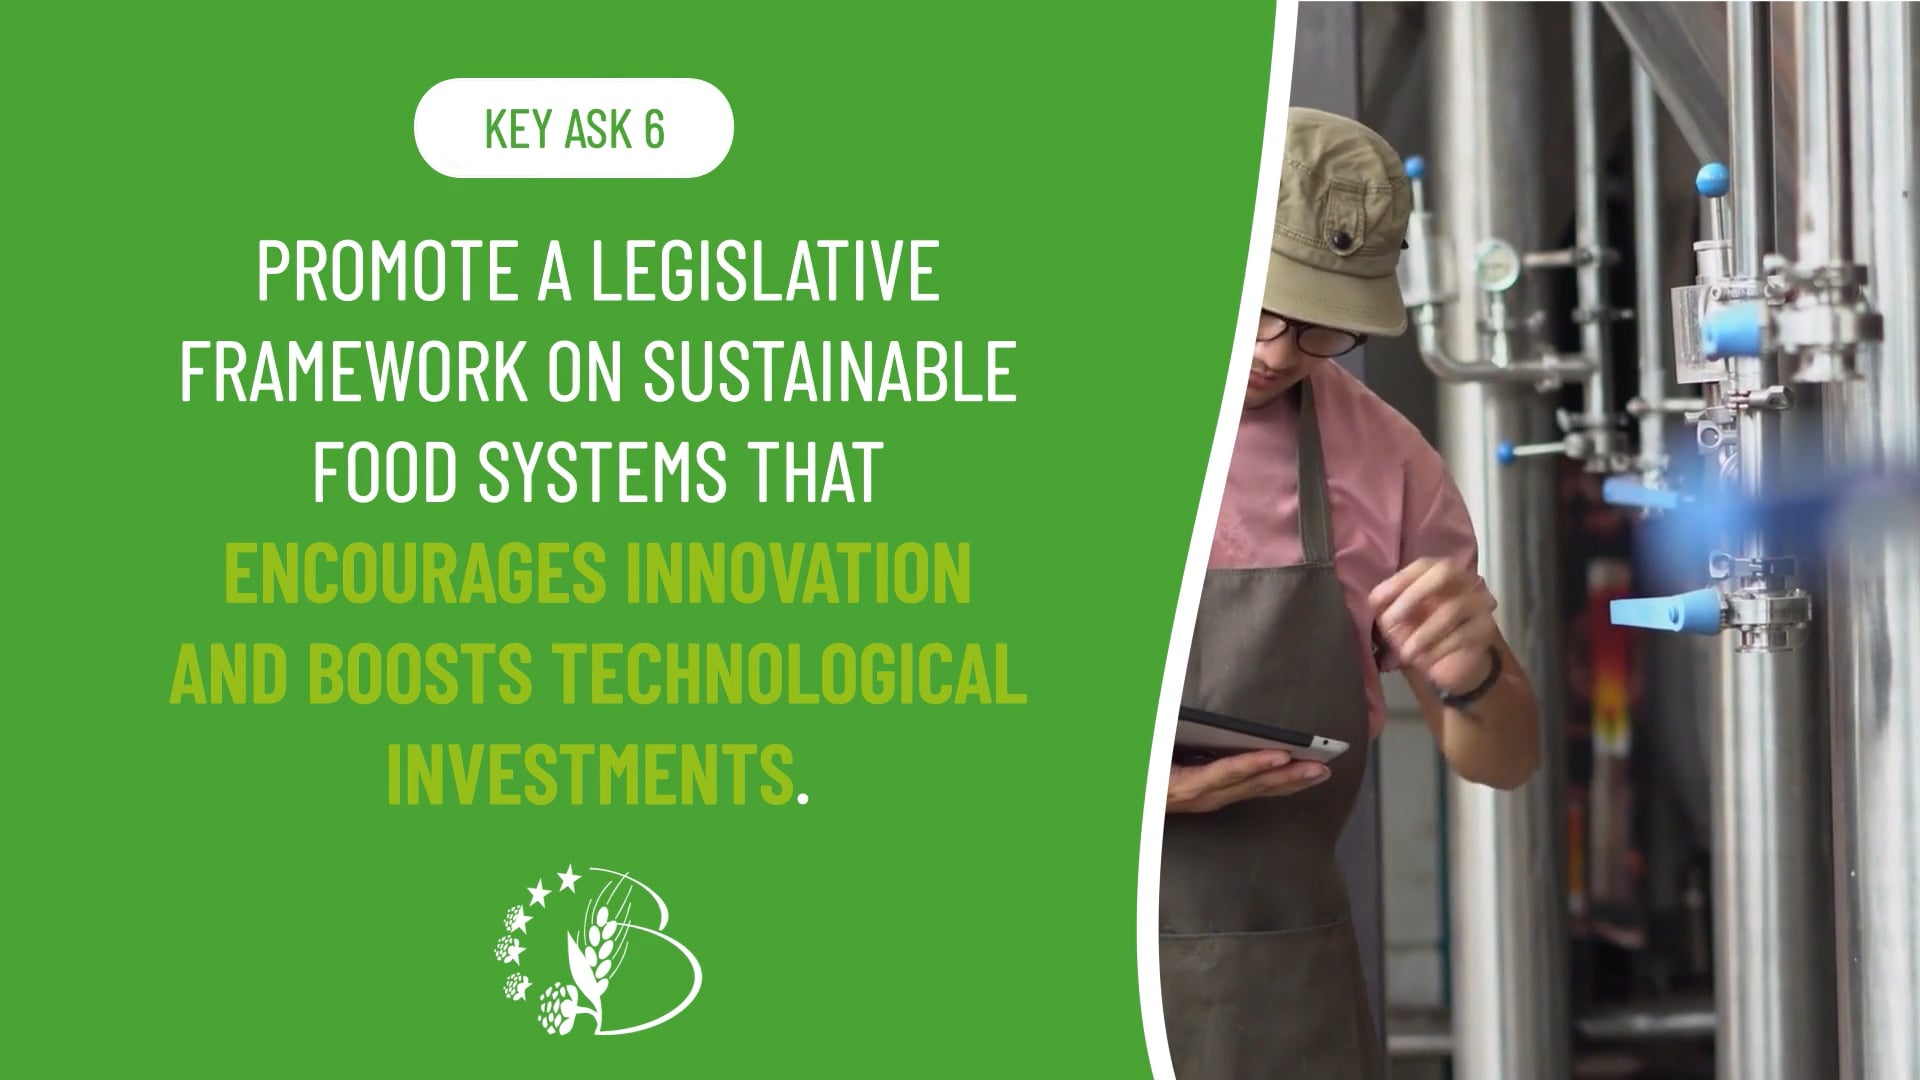 ASK #6 - PROMOTE A LEGISLATIVE FRAMEWORK ON SUSTAINABLE FOOD SYSTEMS THAT ENCOURAGES INNOVATION AND BOOSTS TECHNOLOGICAL INVESTMENTS